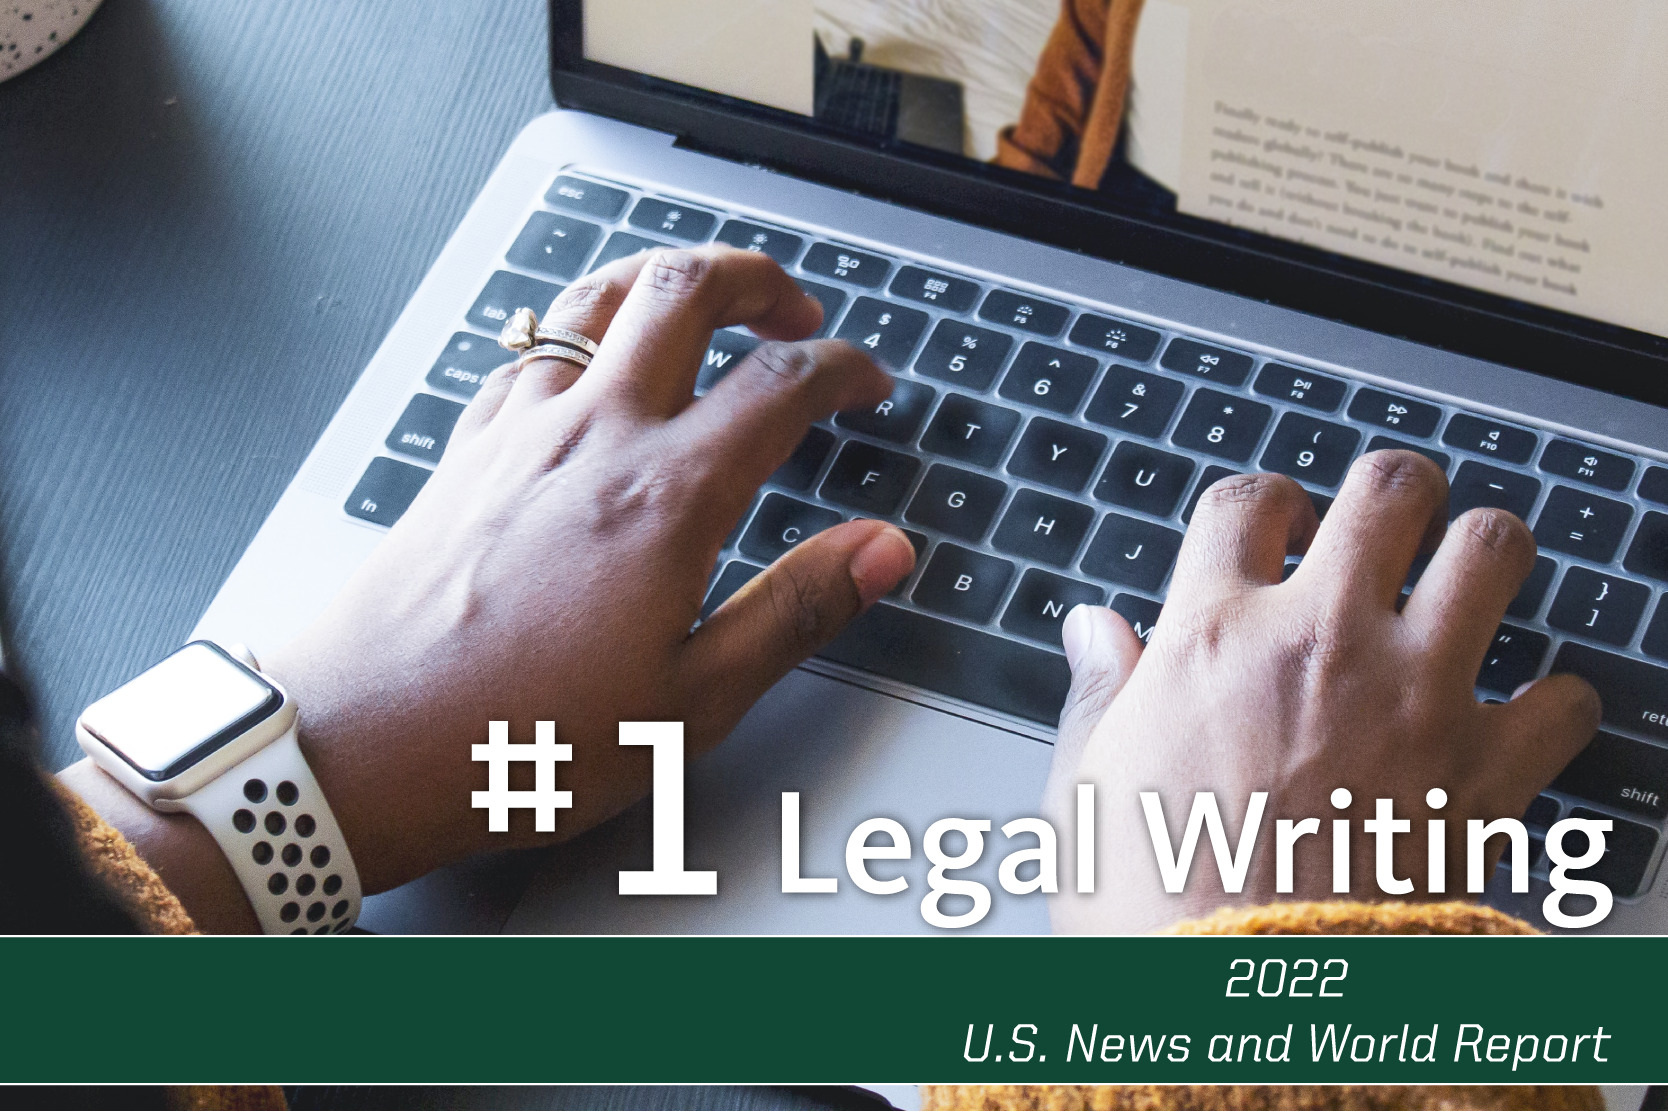 hands typing on laptop, words: #1 Legal Writing 2022 US News and World Report